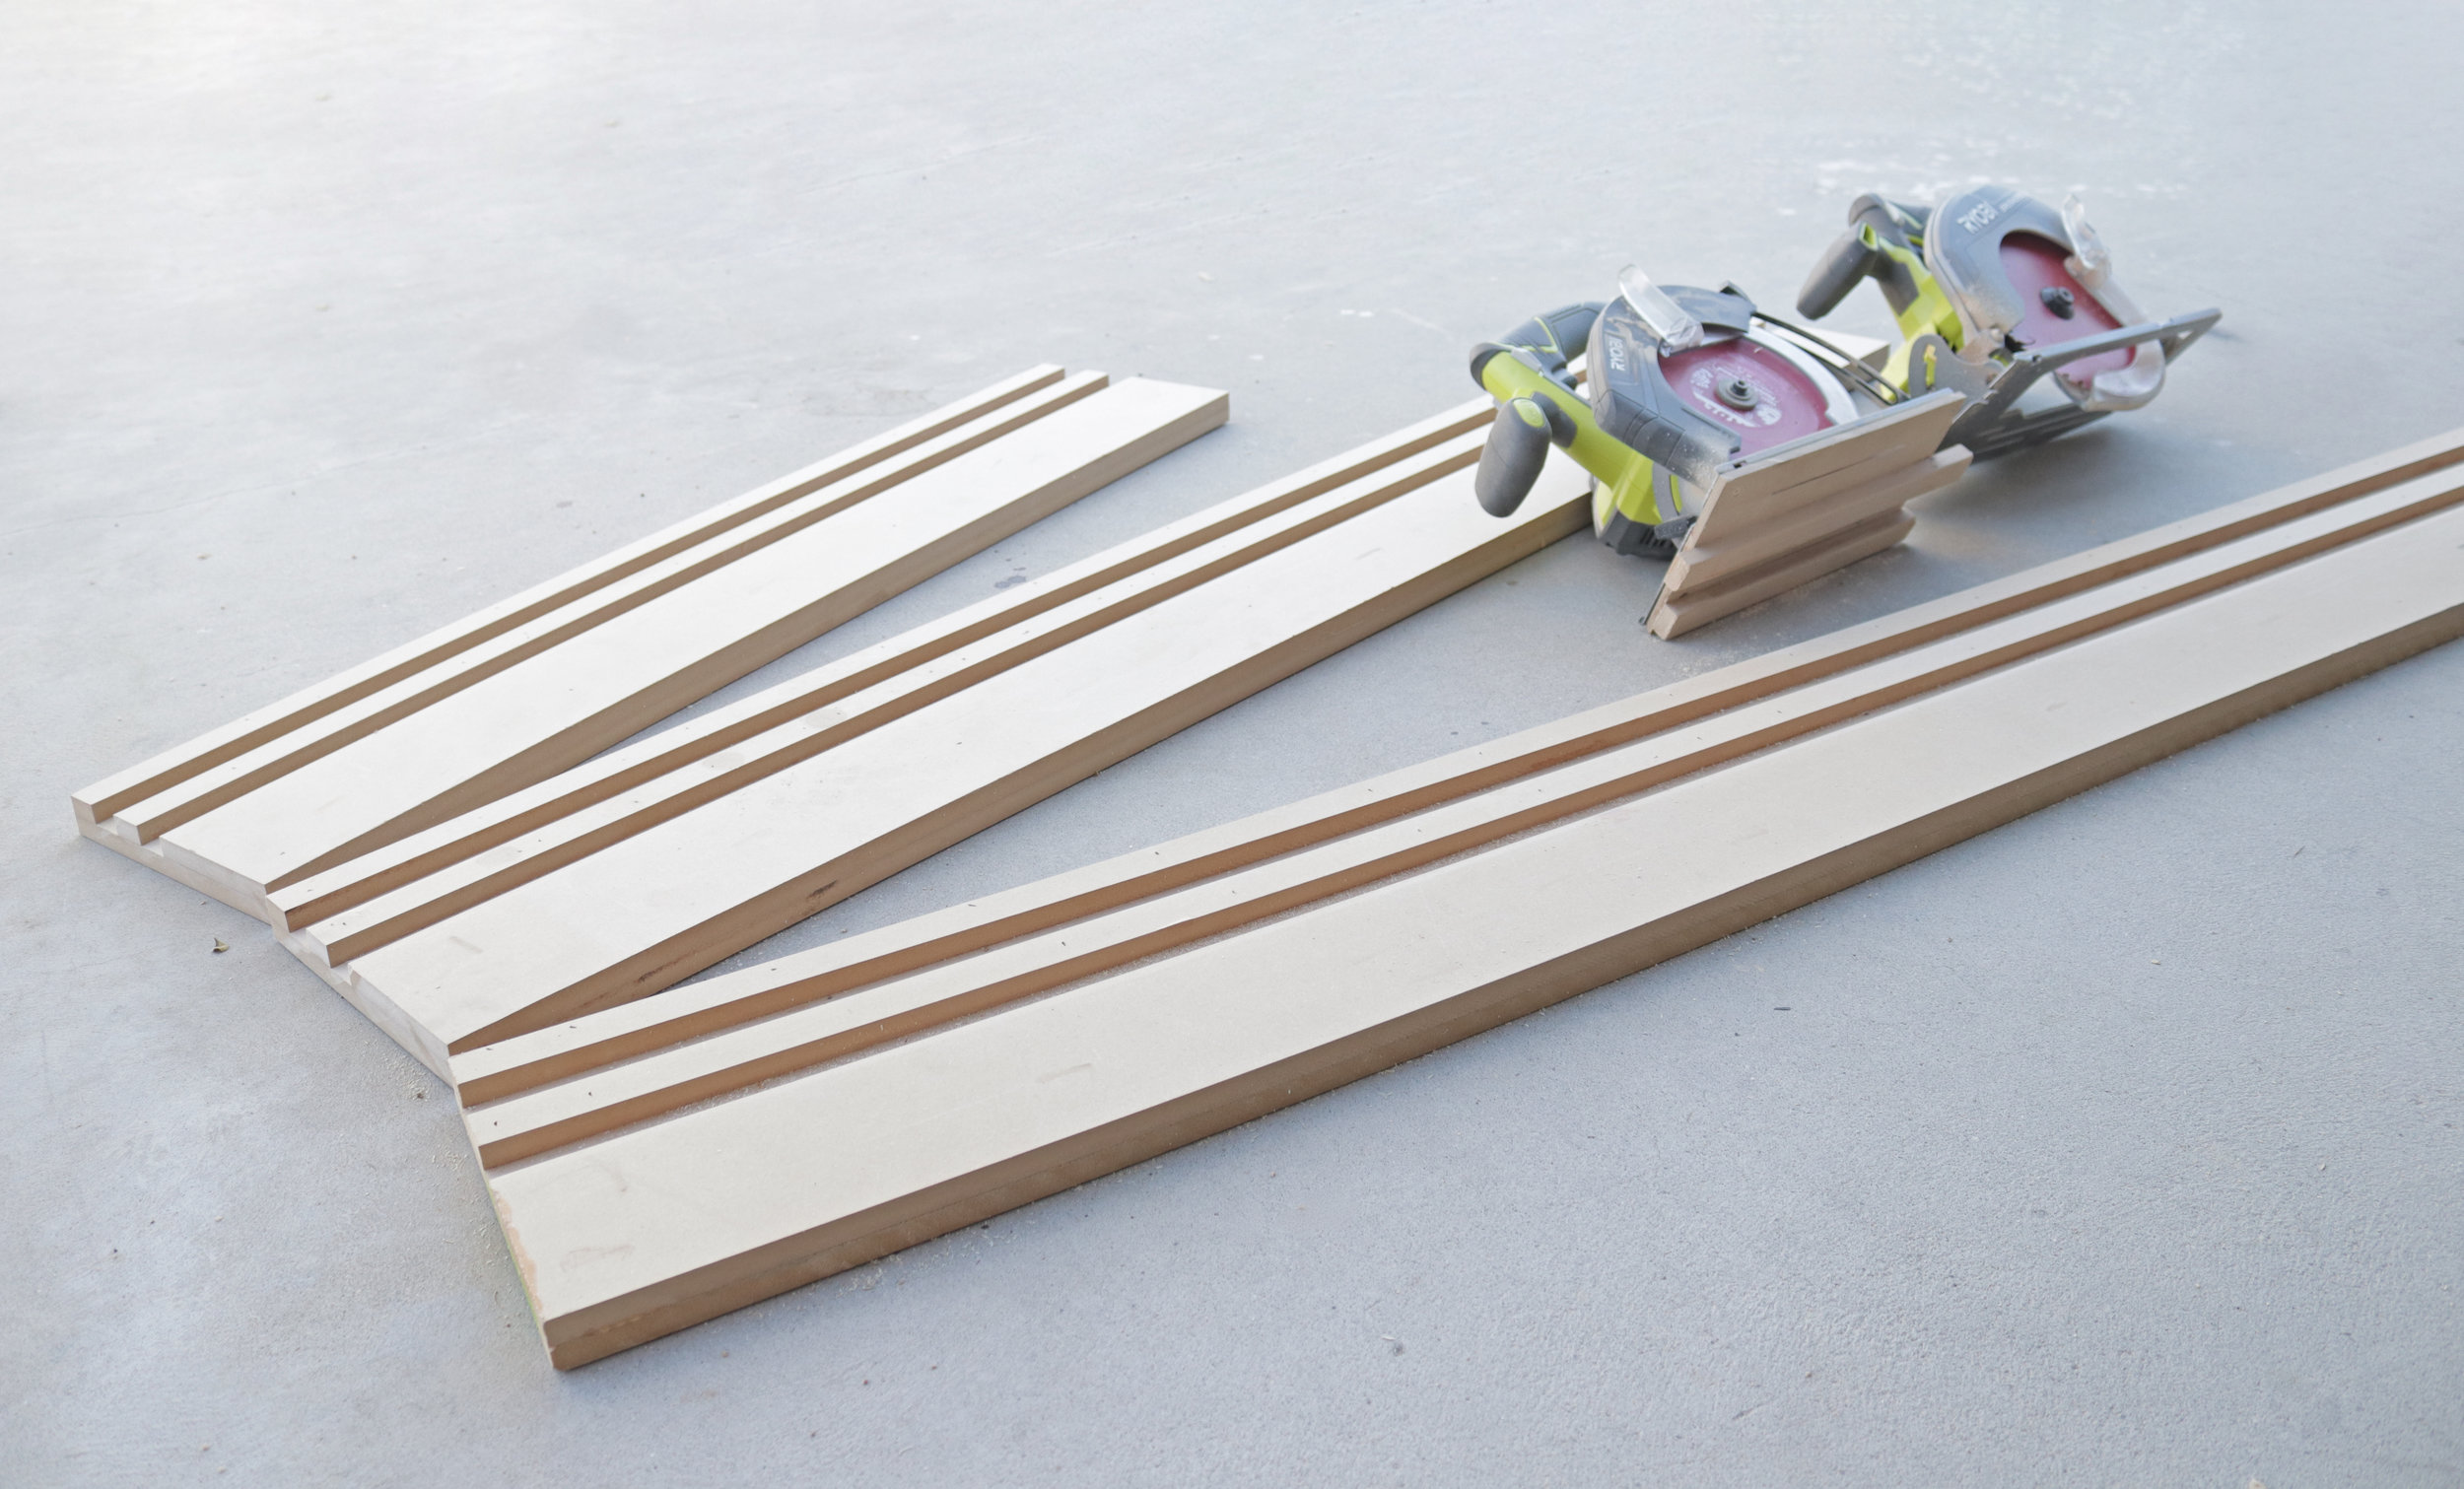  DIY Track Saw Guide for standard Circular Saw. By: Mike Montgomery | Modern Builds   